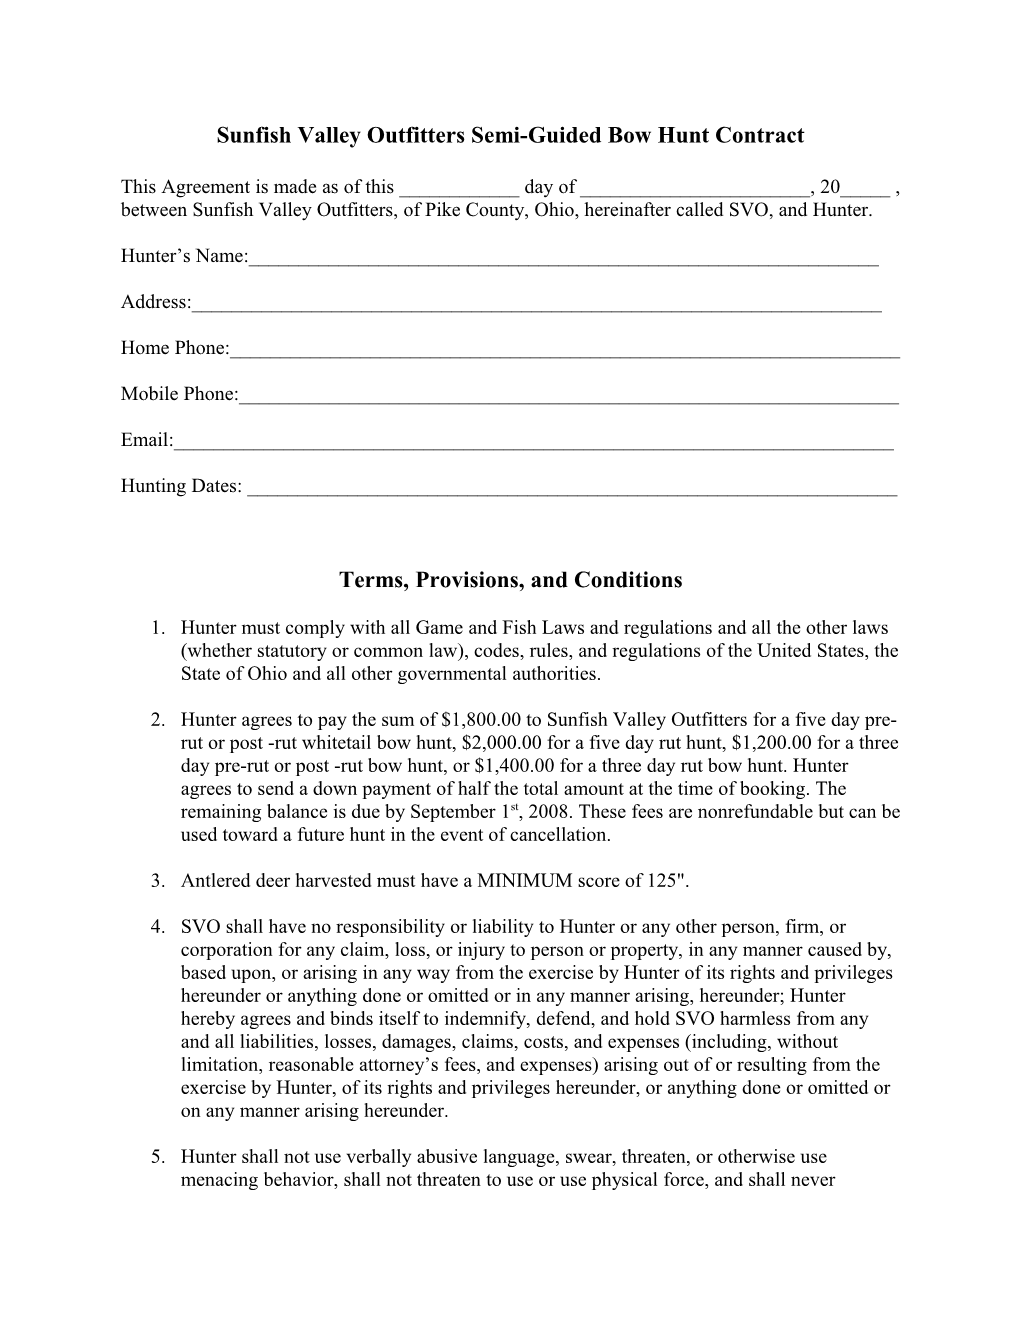 Sunfish Valley Outfitters Overflow Acre Hunt Membership Contract